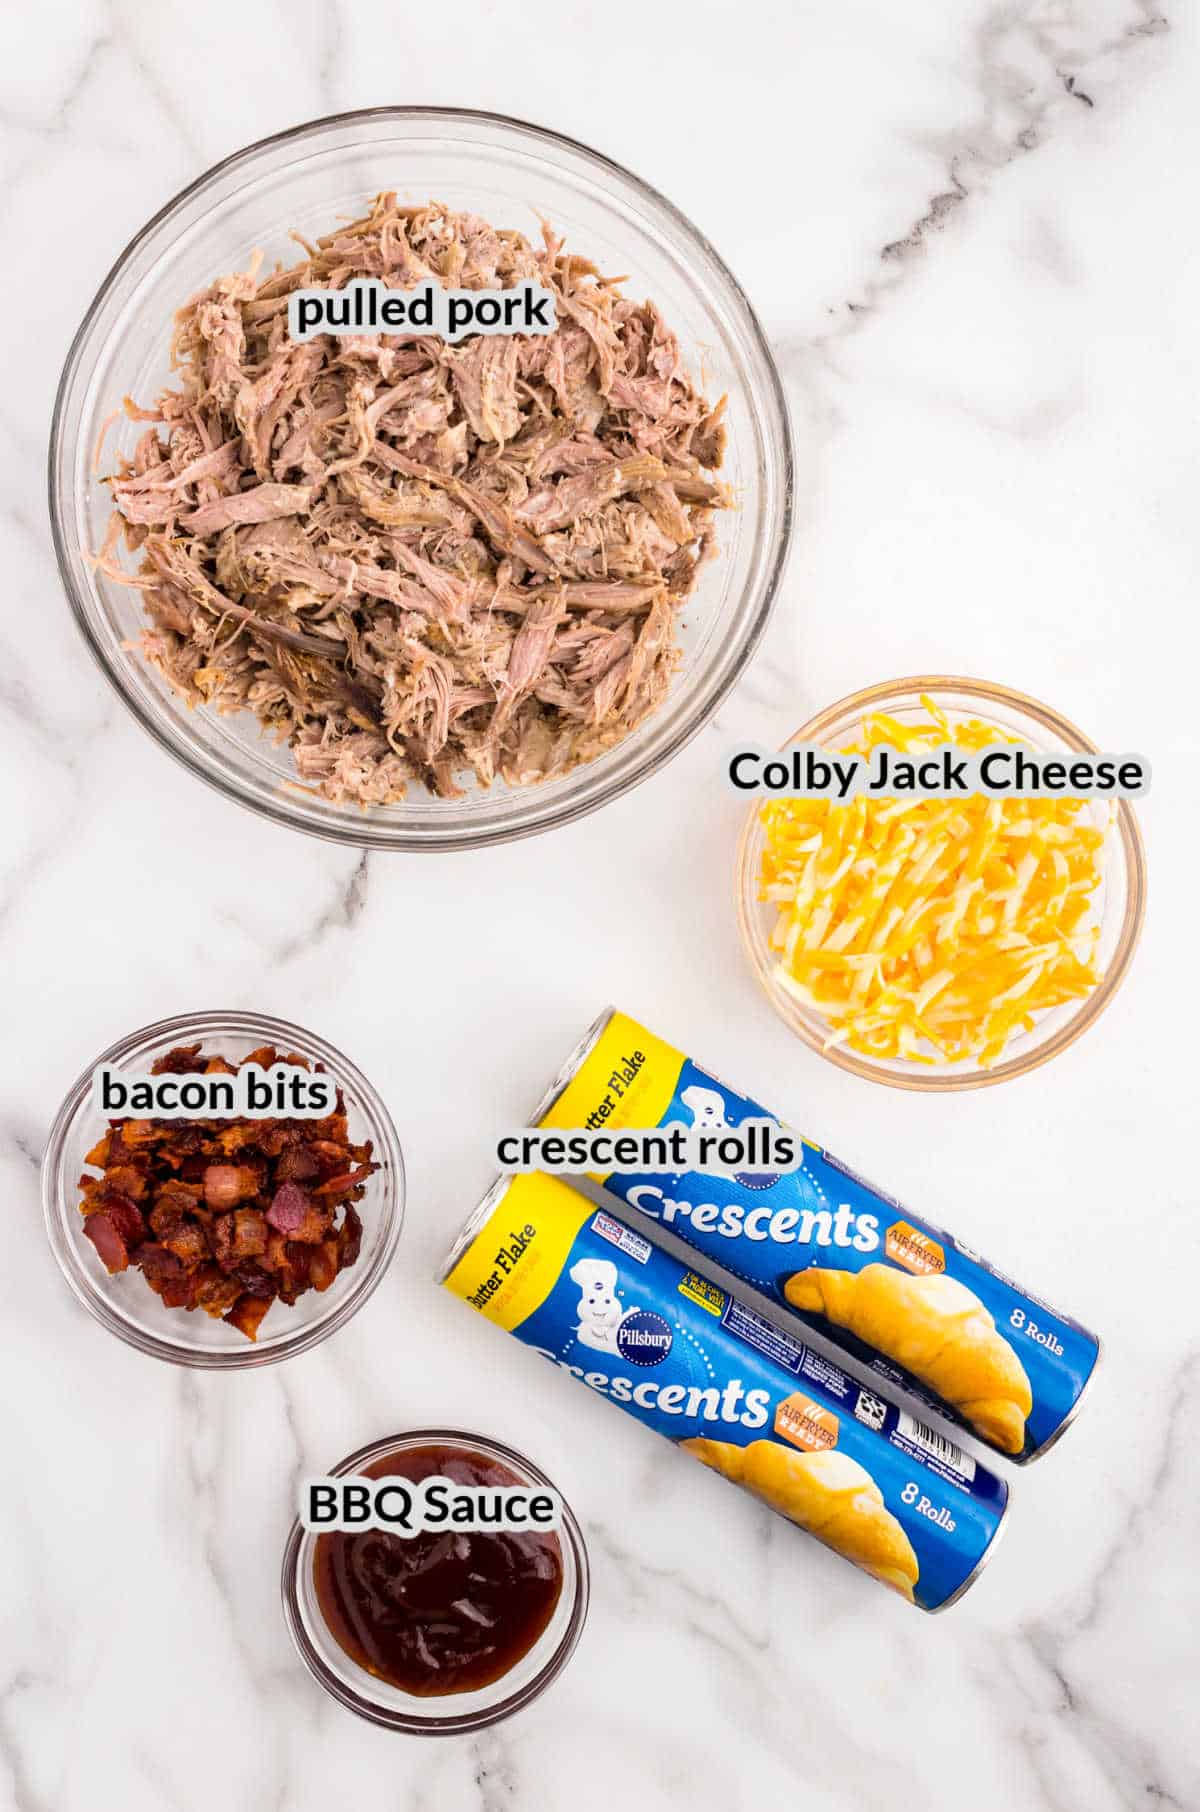 Overhead Image of Pulled Pork Crescent Ring Ingredients